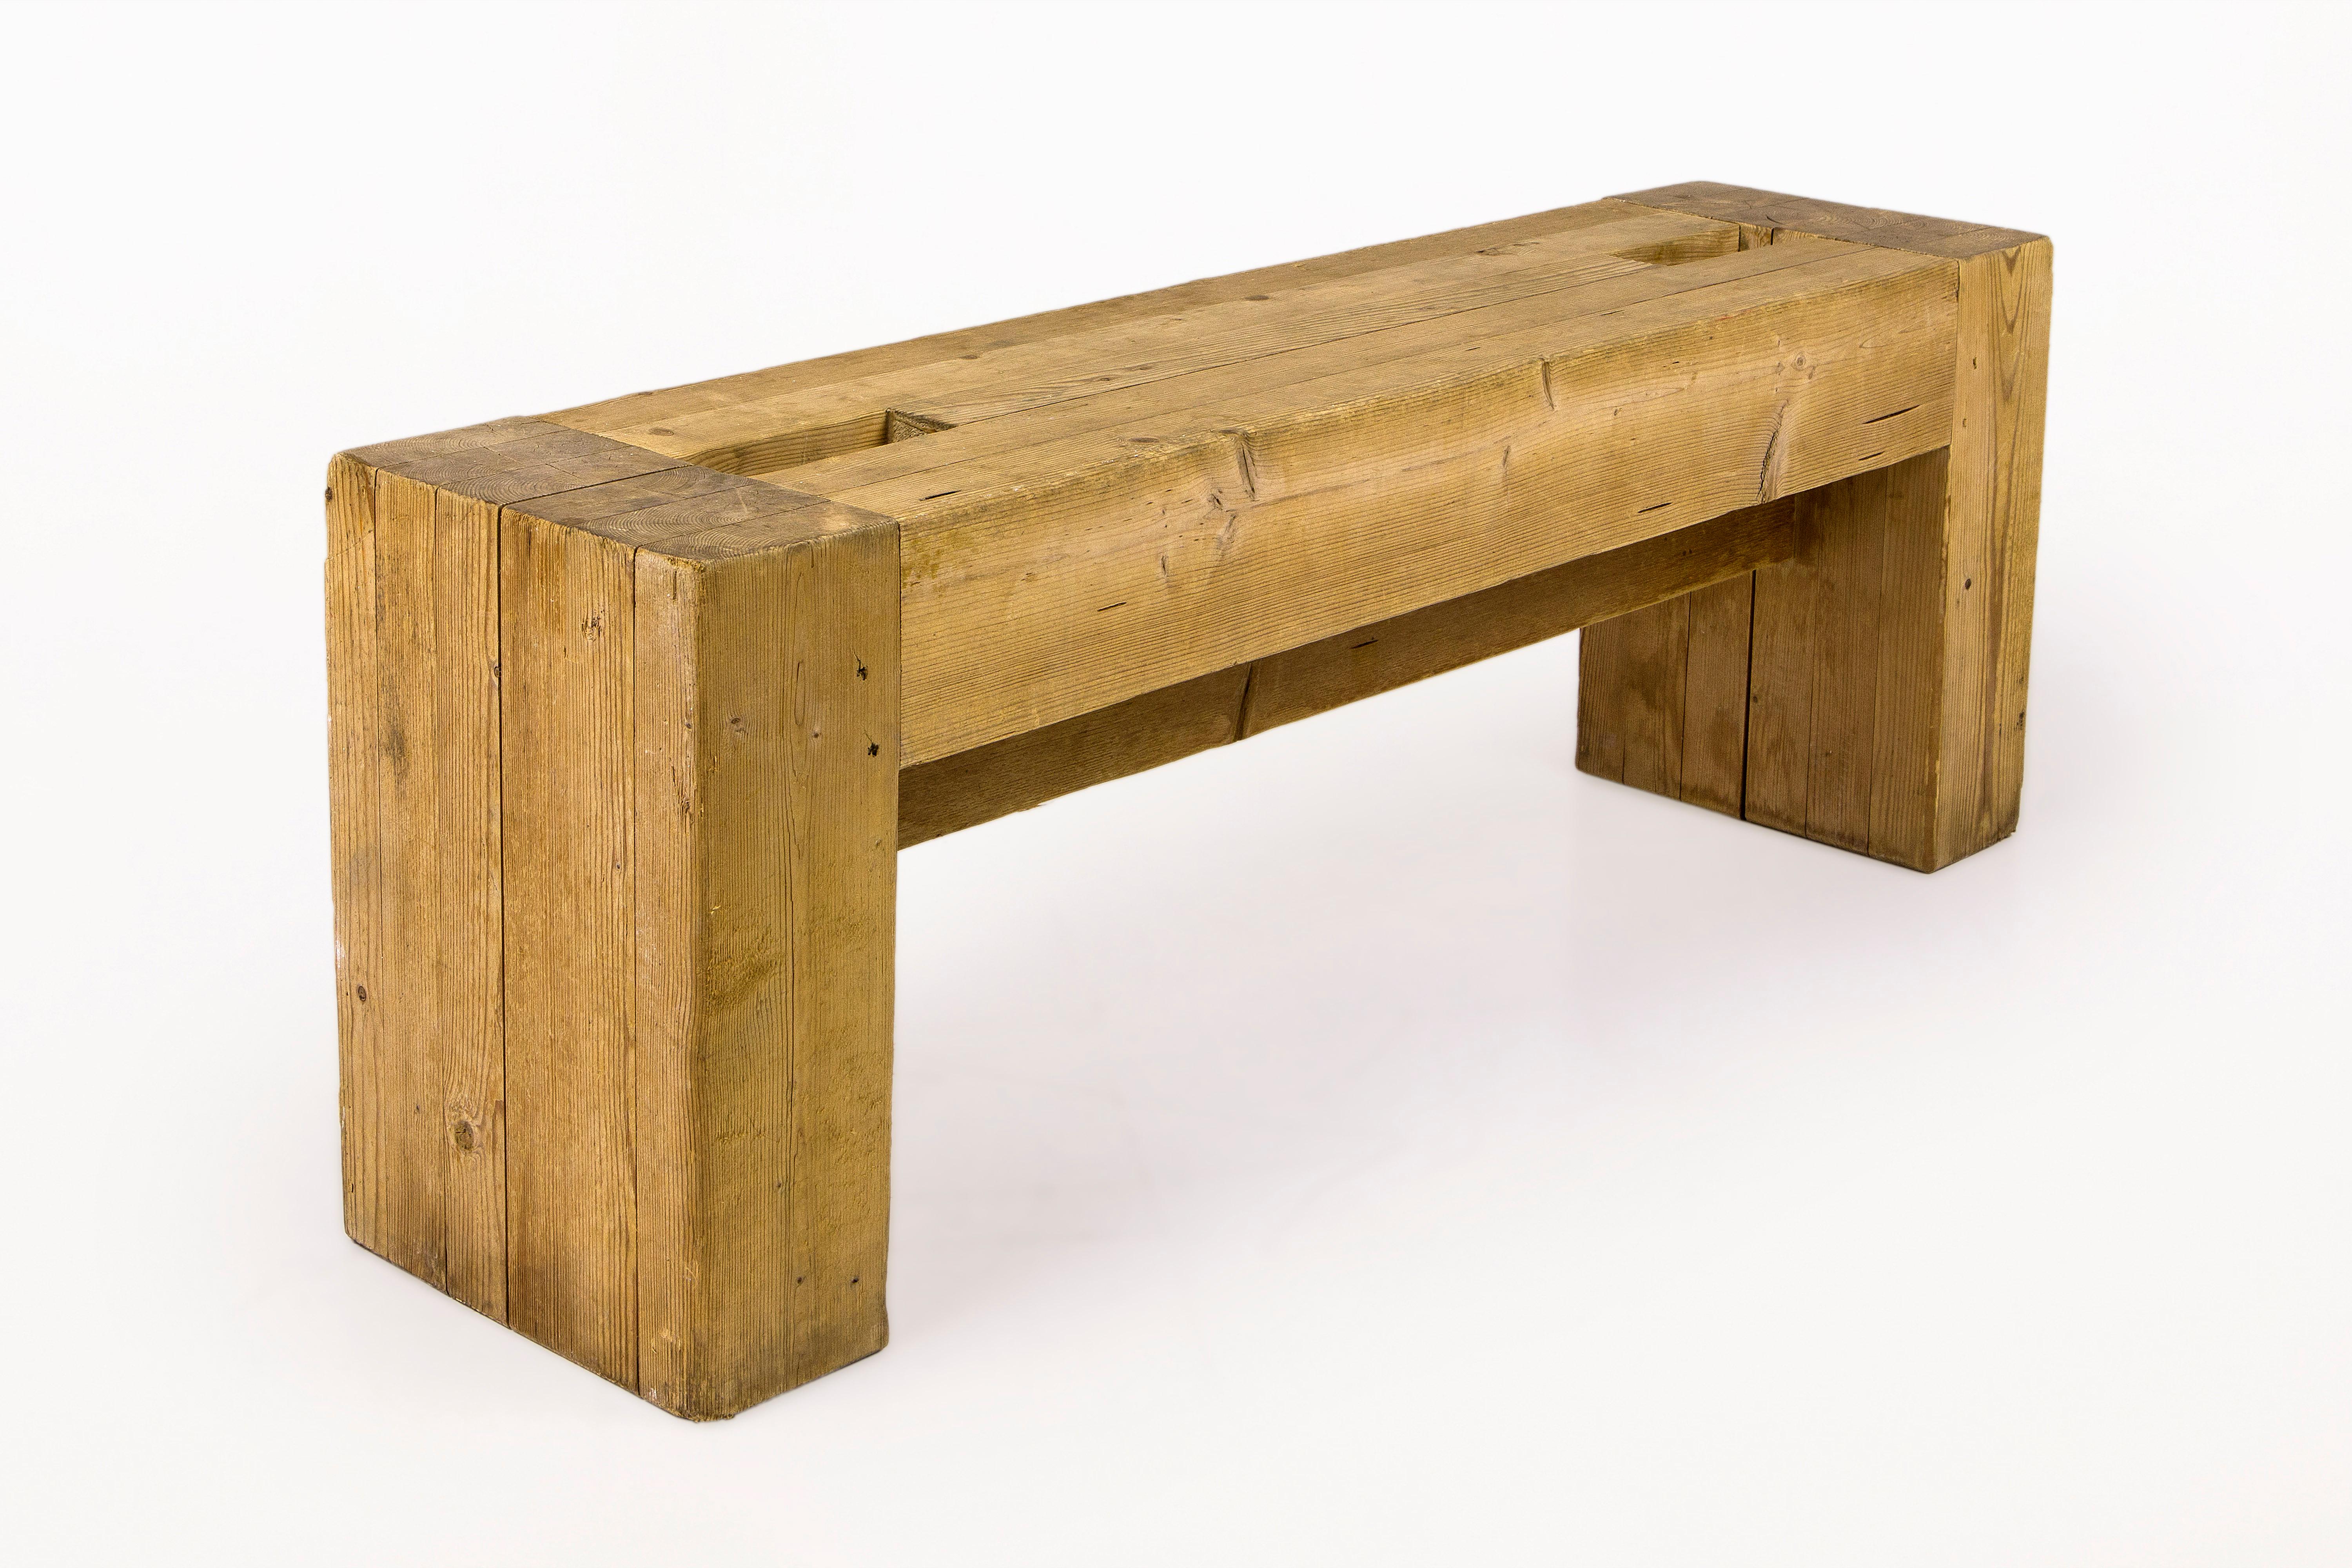 Jean Prouvé with Guy Rey-Millet, 
Set of a pair of stools and one bench, 
Wood, 
Refuge de la Vanoise, CAF, Les Arcs, 
circa 1967, France. 

Measure: 
Bench: Height 43 cm, width 123 cm, depth 30 cm. 
Stools: Height 43 cm, width 30 cm, depth 30